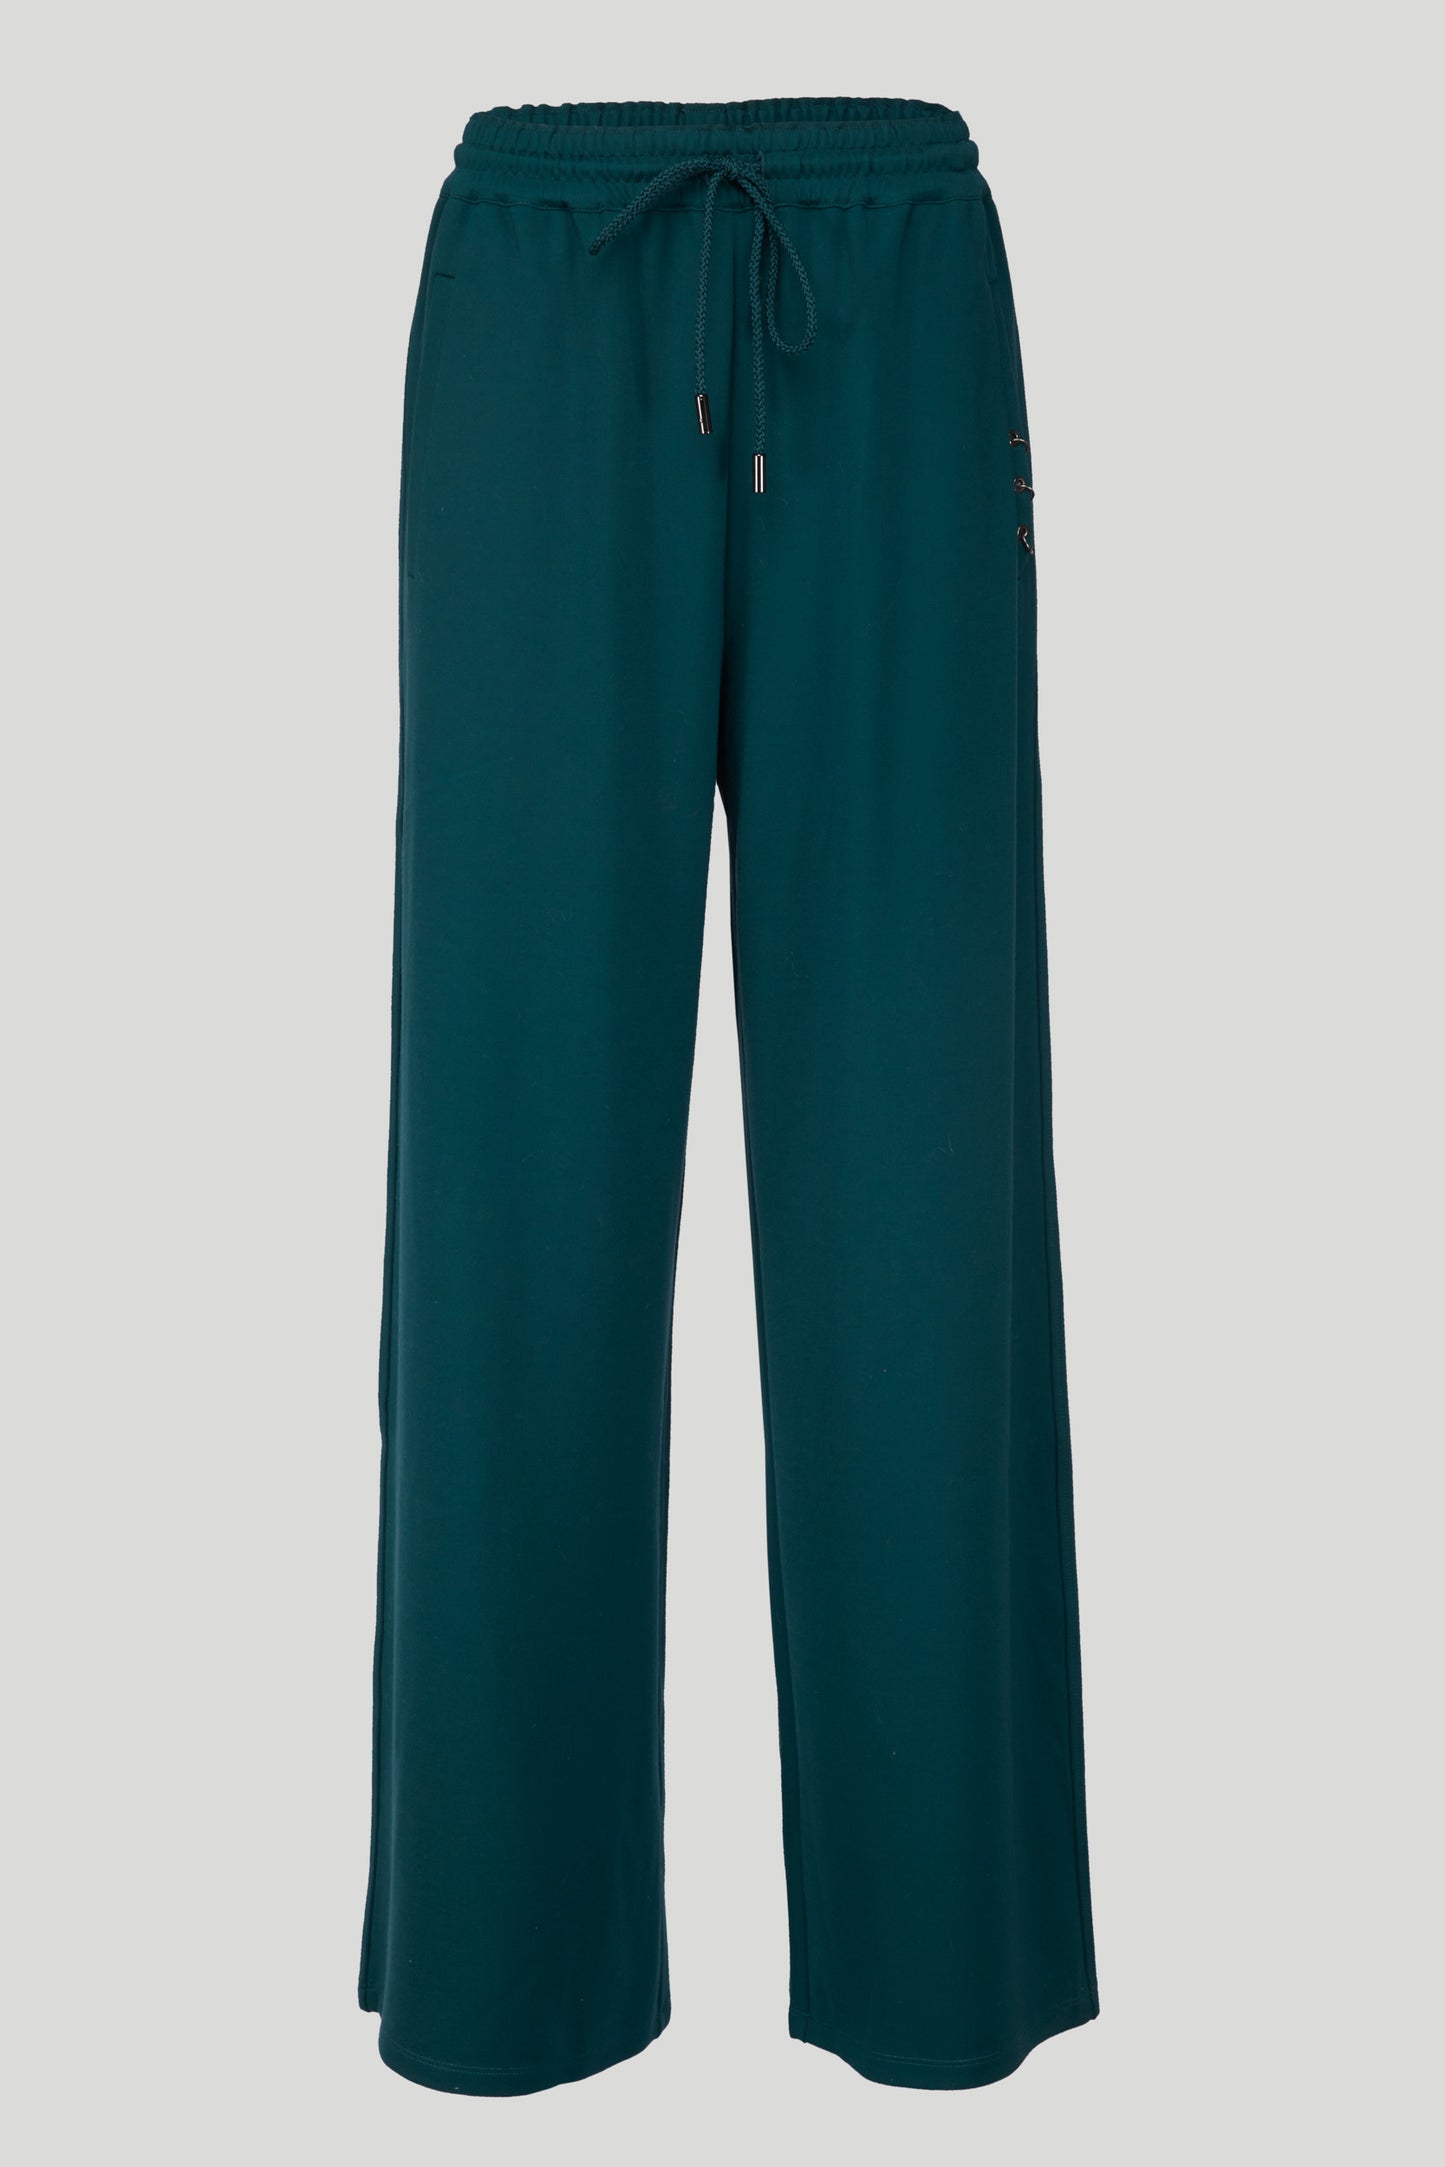 TWINSET Green Tracksuit Pants